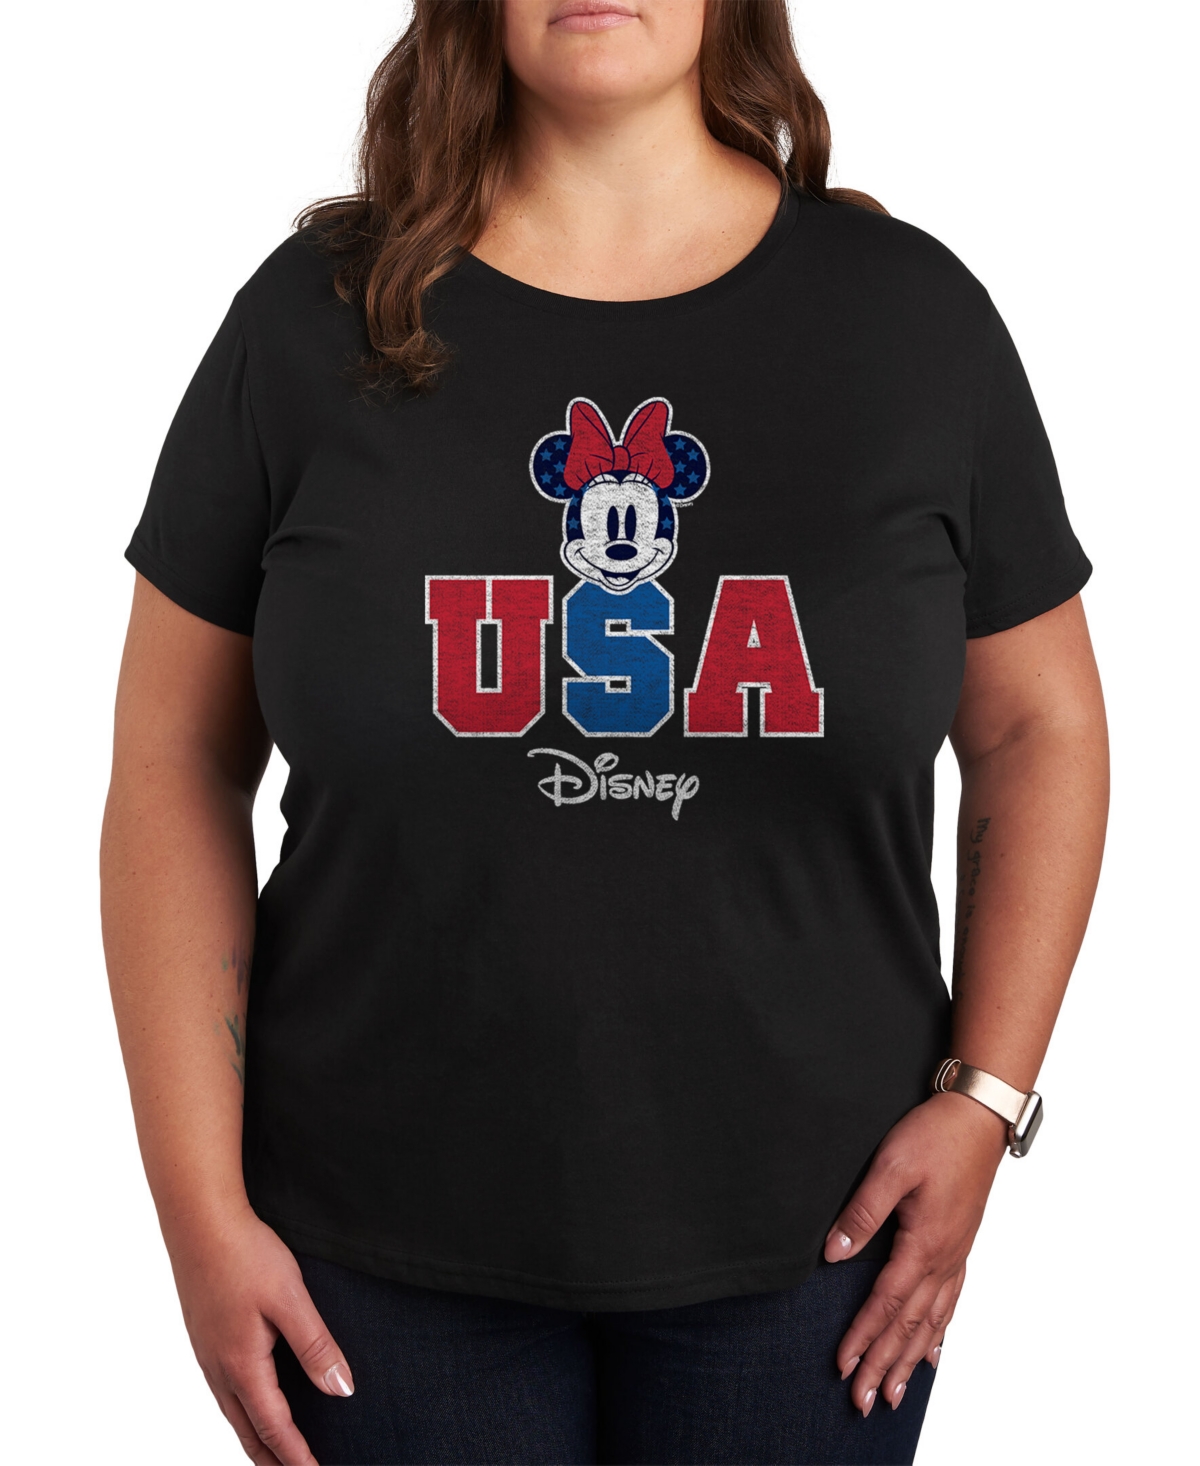 Air Waves Trendy Plus Size Minnie Mouse Graphic T-shirt In Black